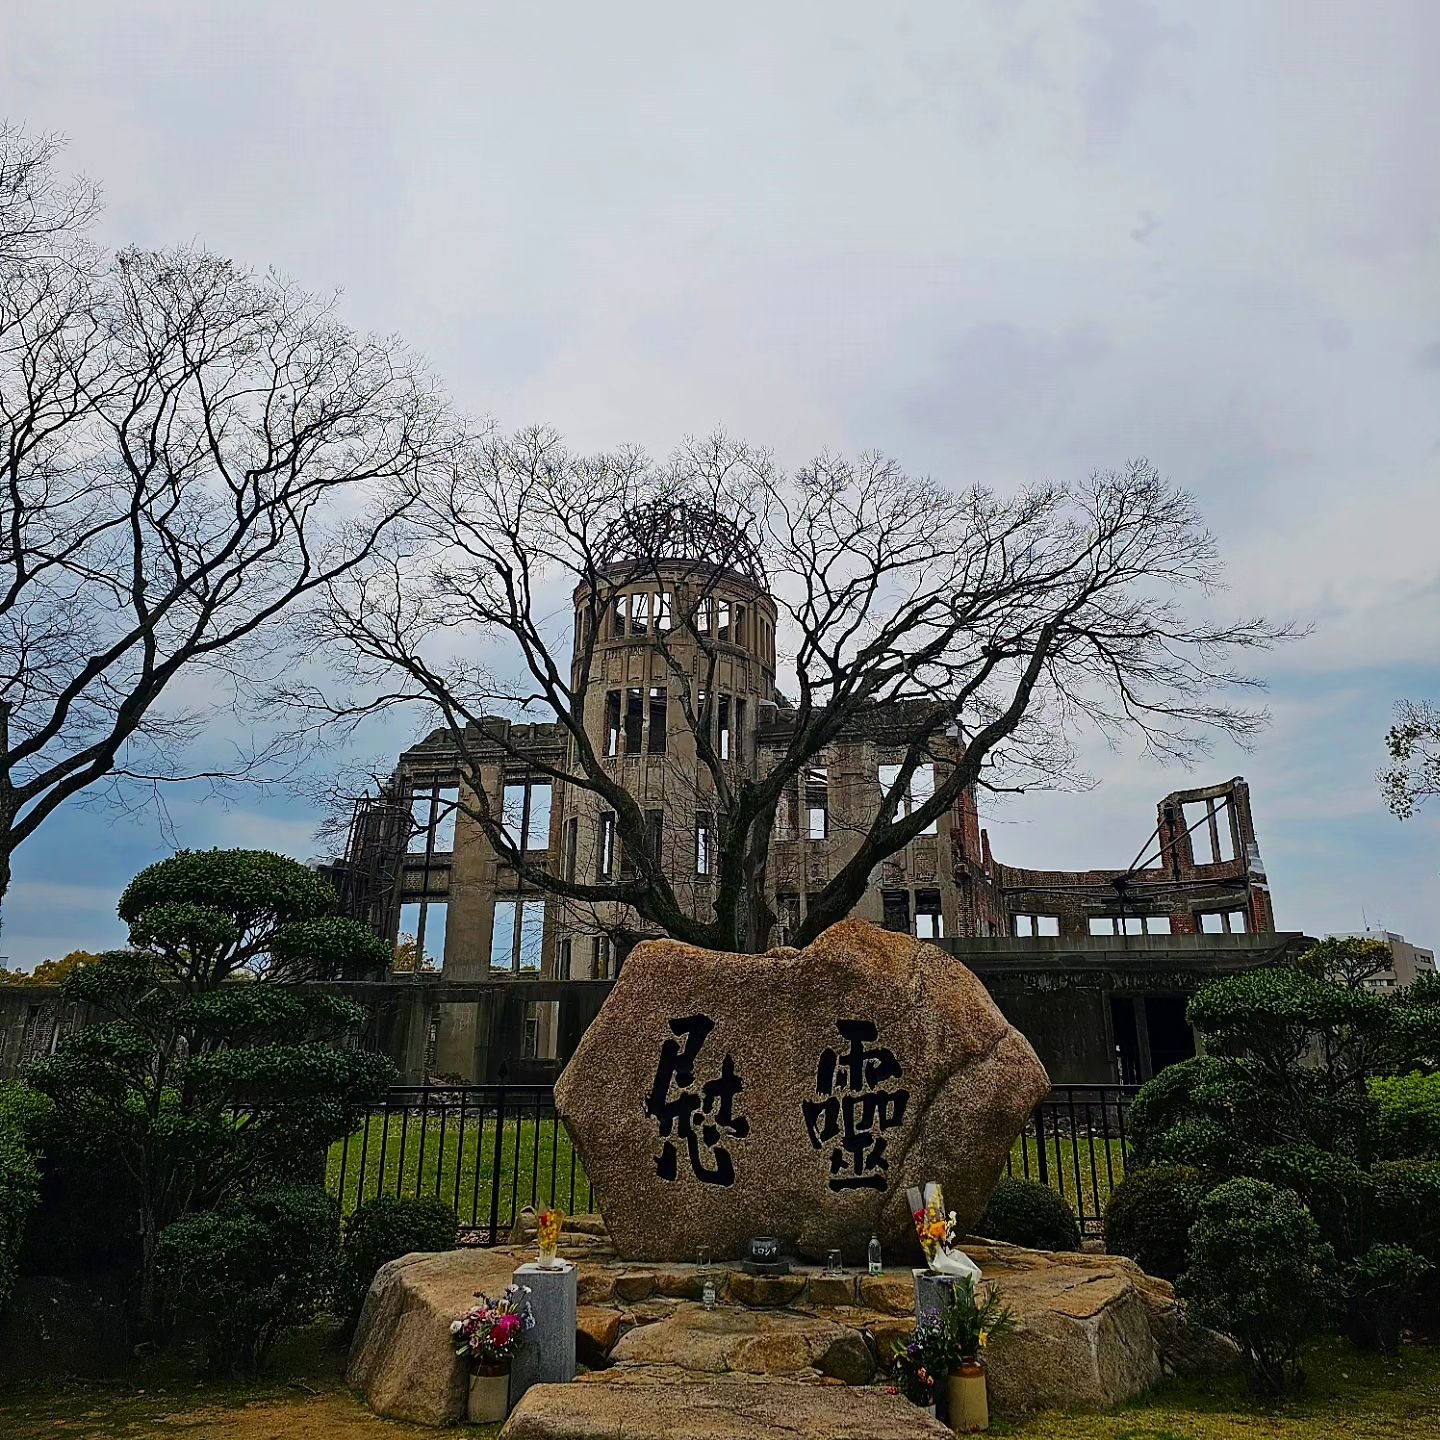 It was super emotional seeing the Atomic Bomb Dome and the Children's Peace Monument in Hiroshima. The dome was the only structure left after the world's first atomic bomb exploded on 6th August 1945. It's a stark reminder of the devastating impact o